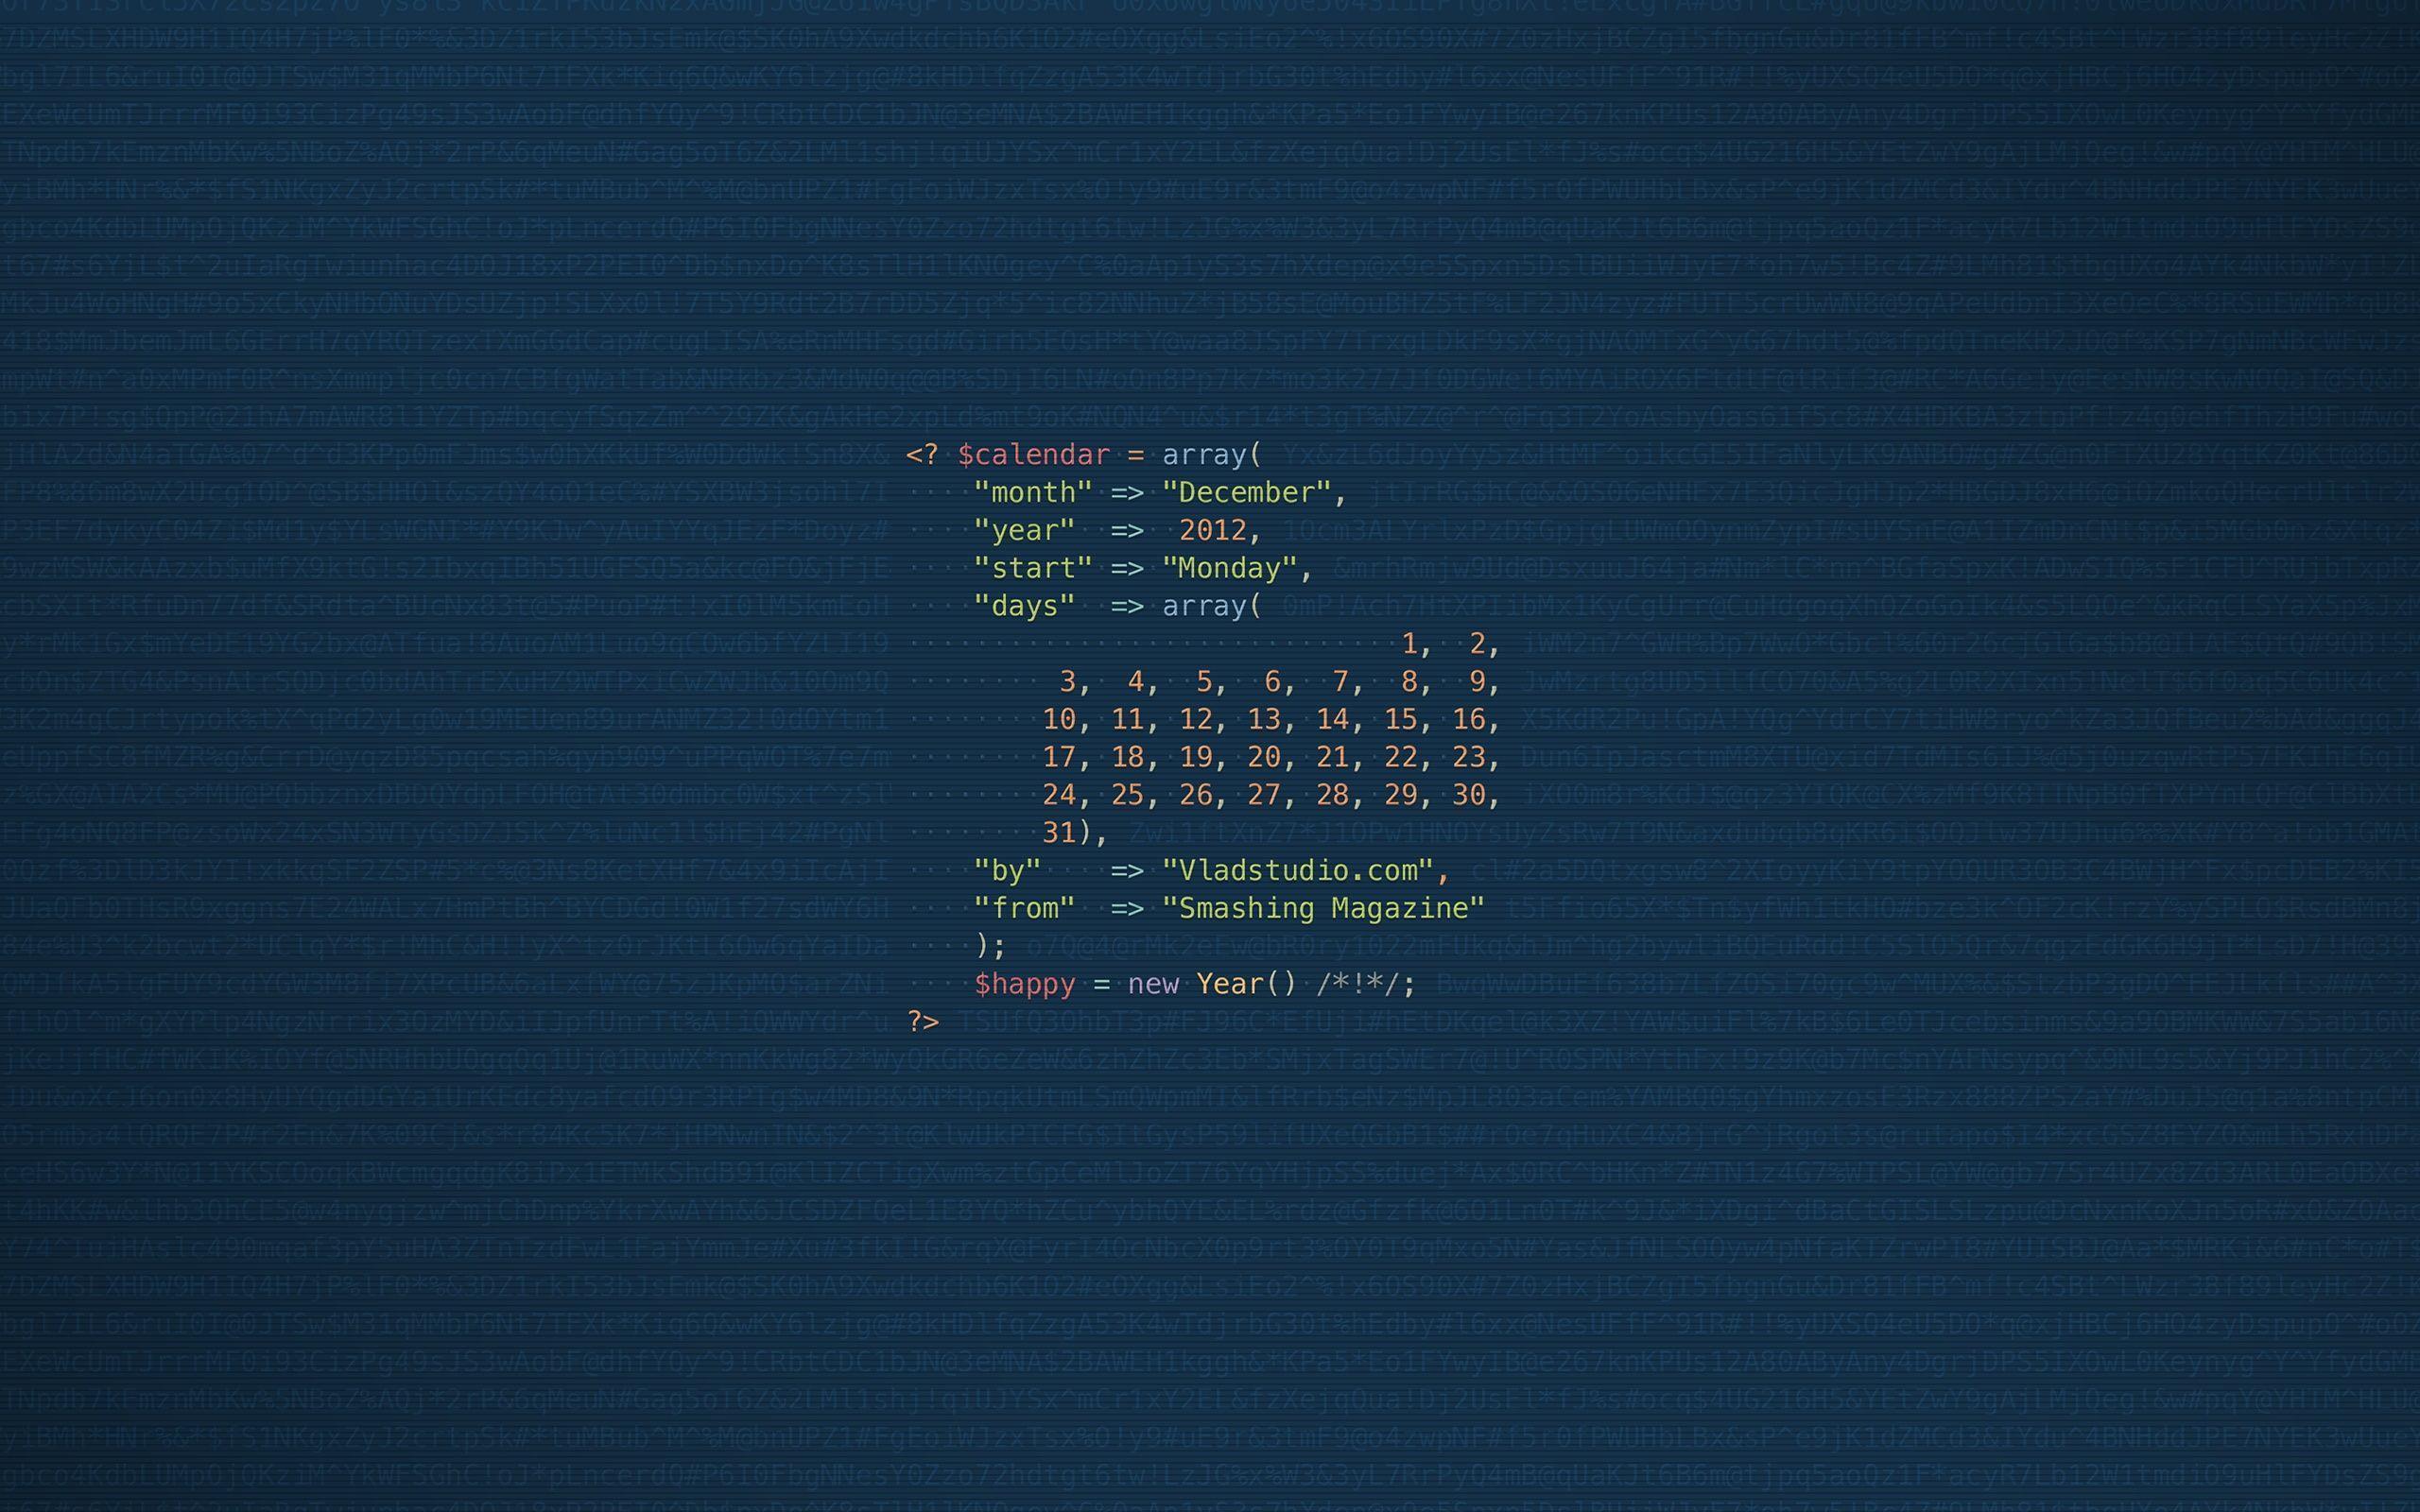 Cool Coding Background Superb Coding Wallpaper